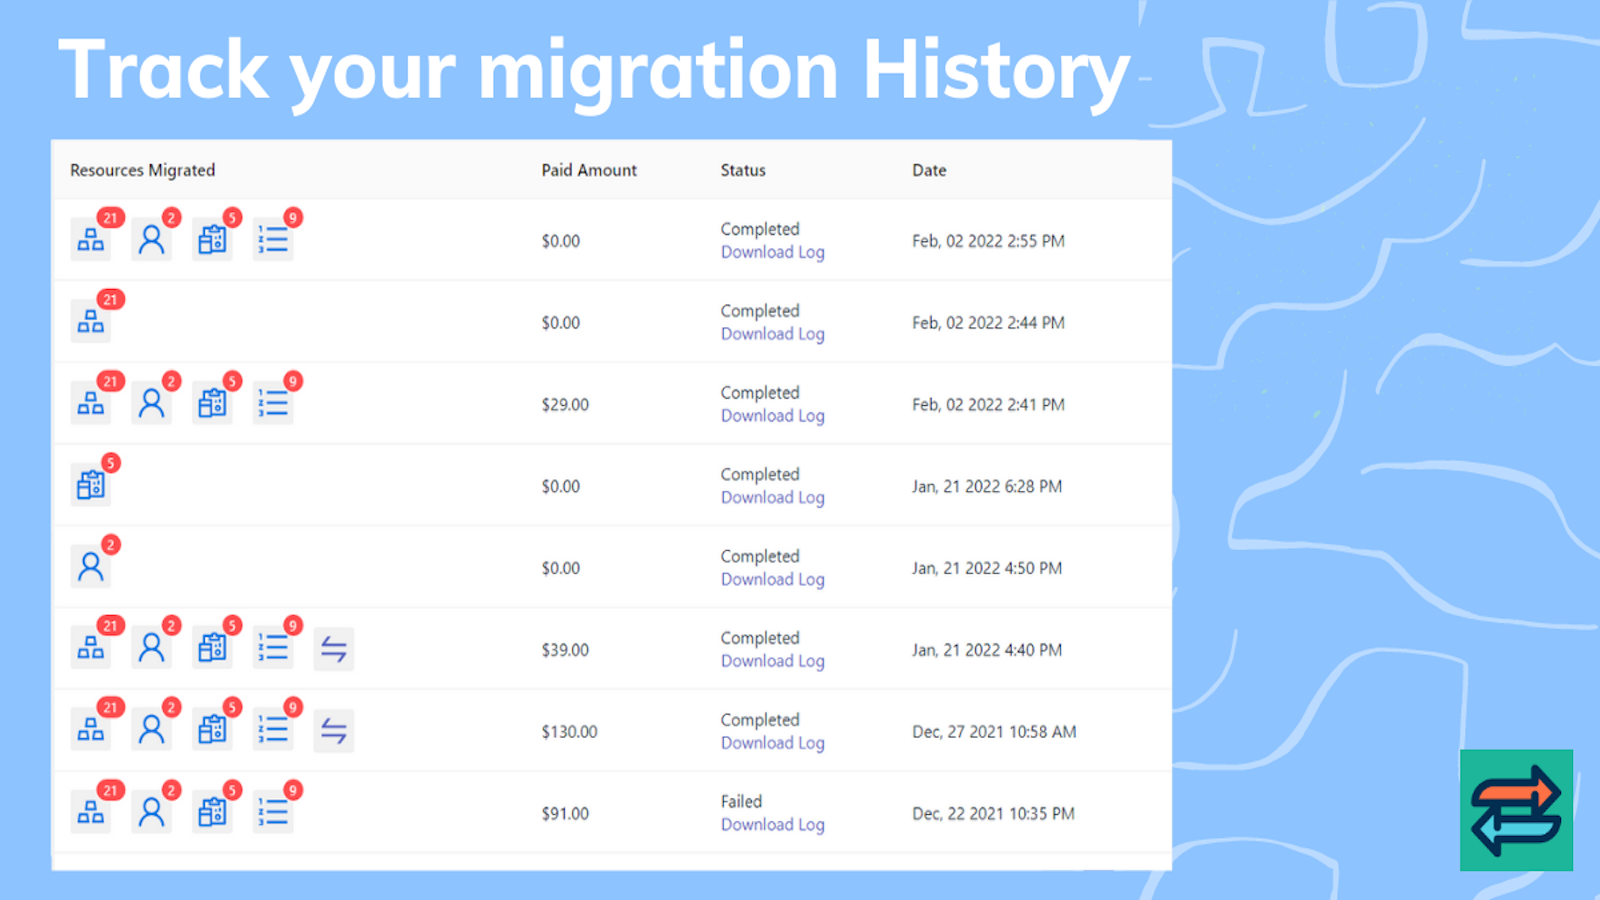 Track your migration history with Prestify - monitor your migration data easily.